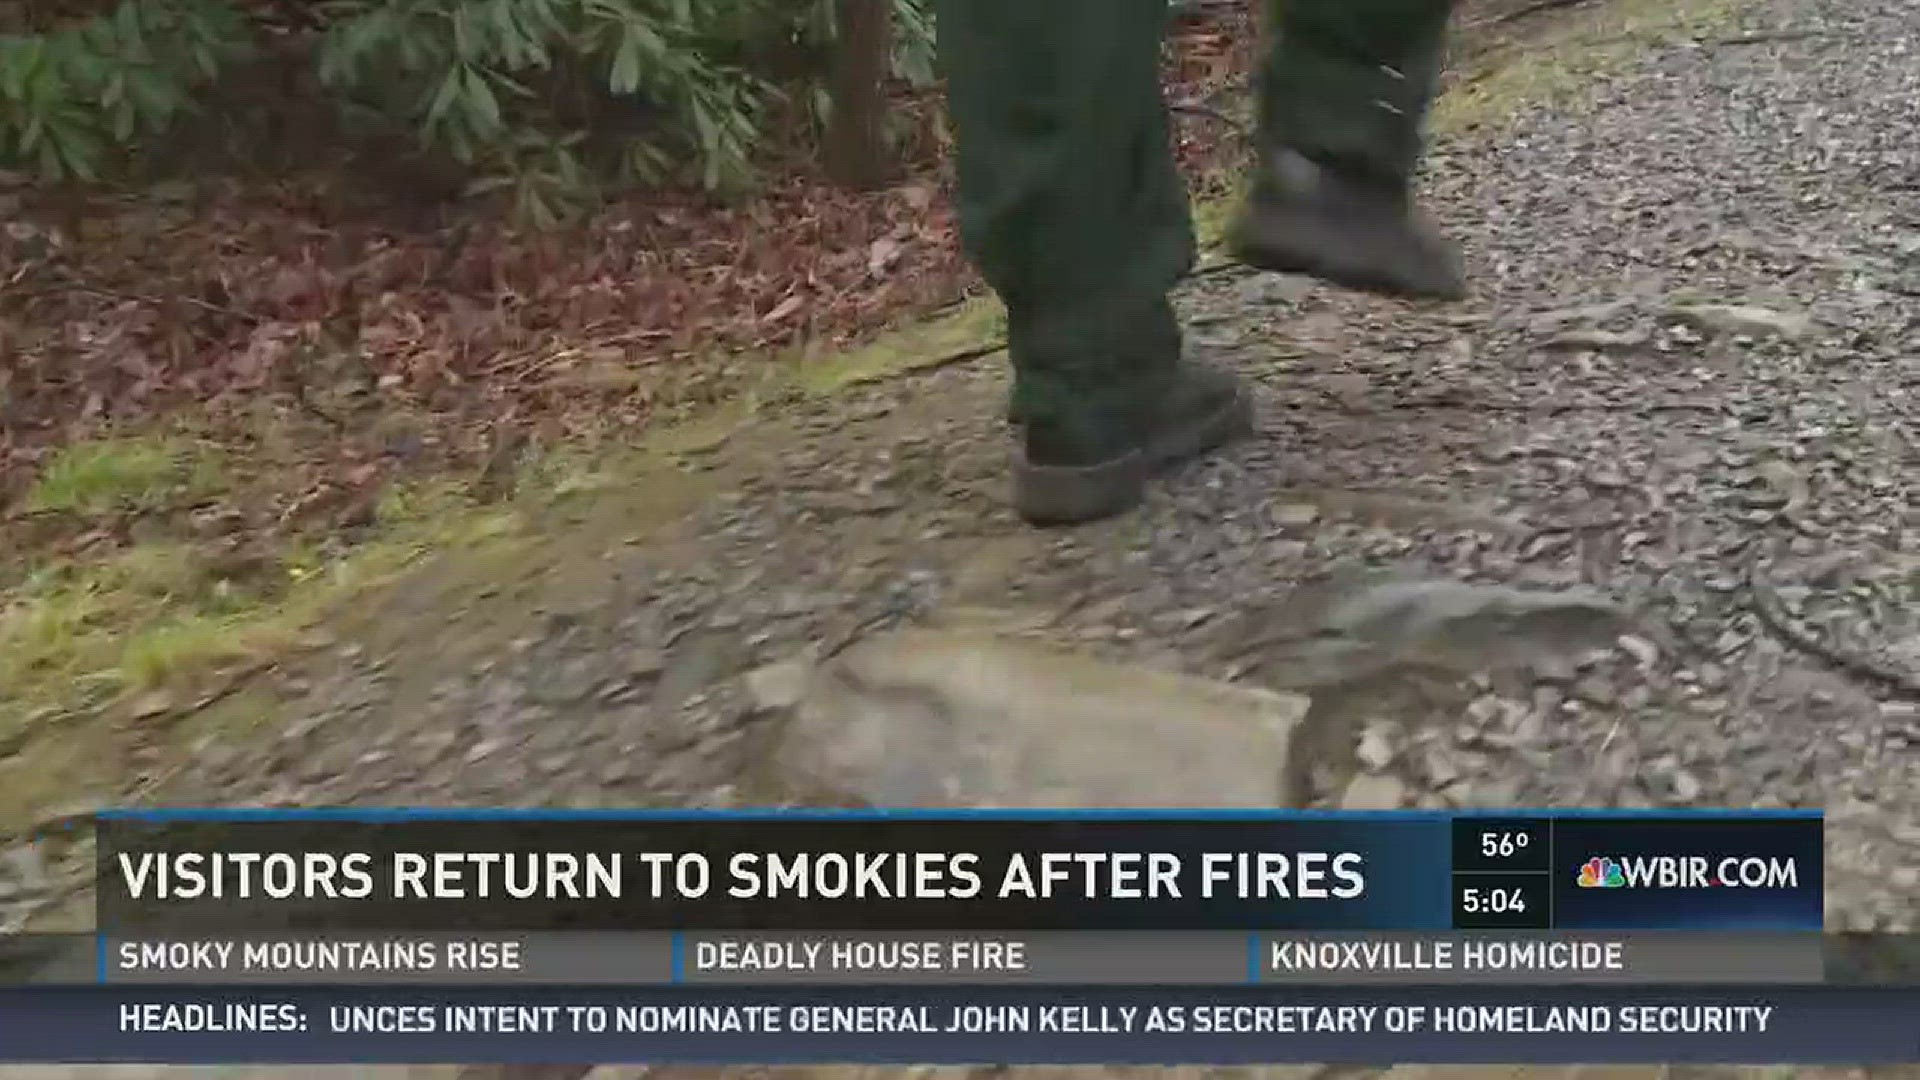 Crews expect the fire in the Great Smoky Mountains National Park to continue for the next week or two, but visitors have returned to the area. (12/12/16 5PM)